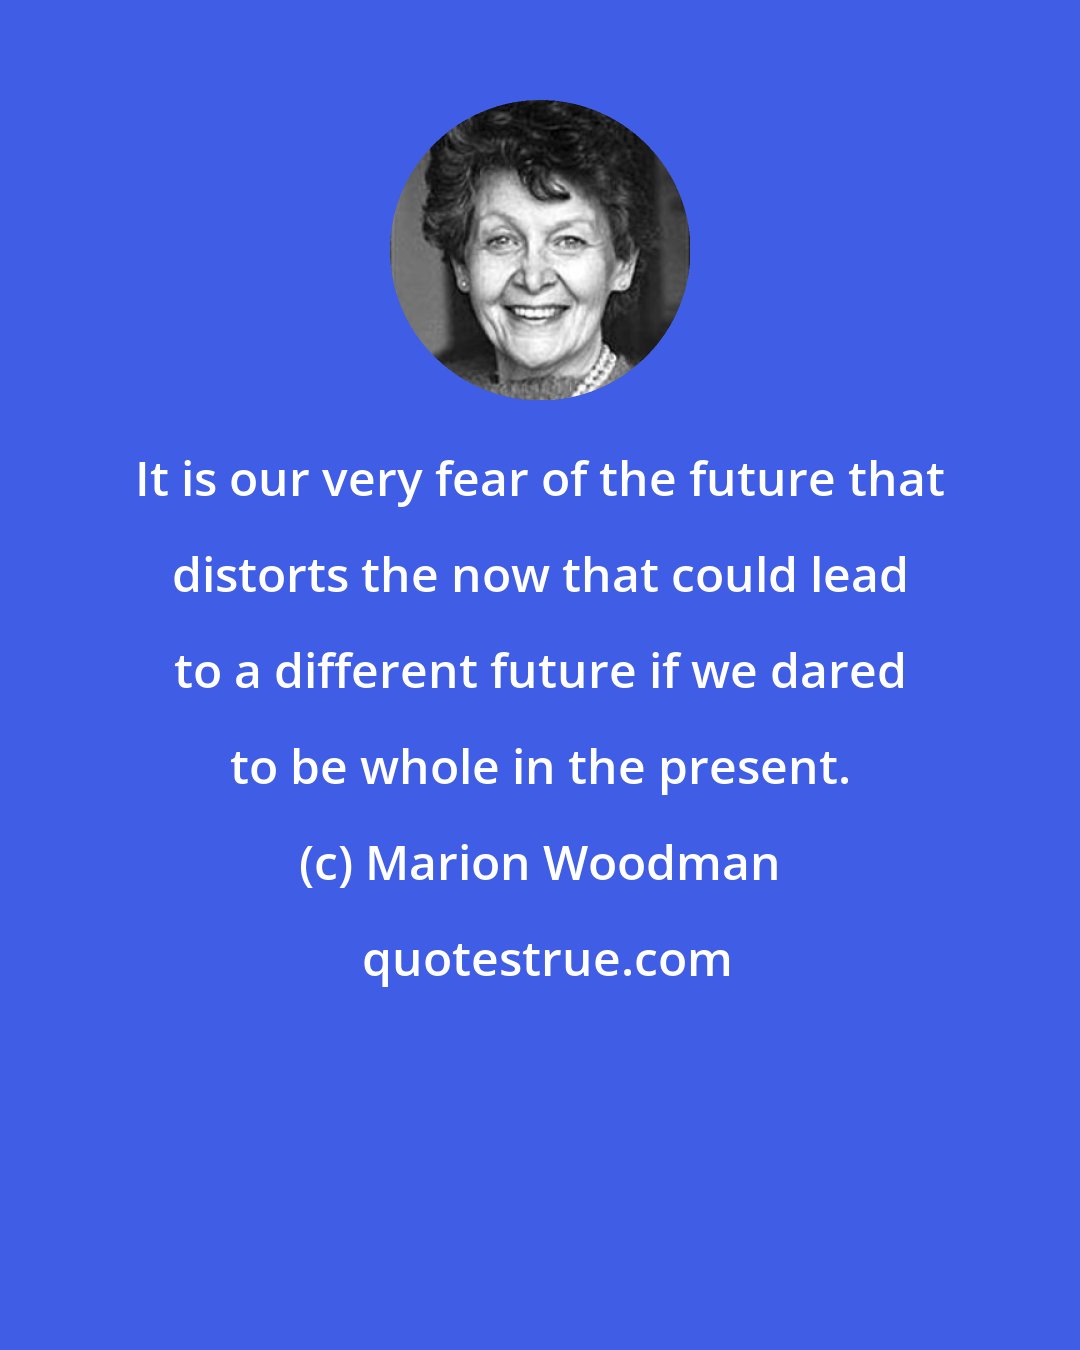 Marion Woodman: It is our very fear of the future that distorts the now that could lead to a different future if we dared to be whole in the present.